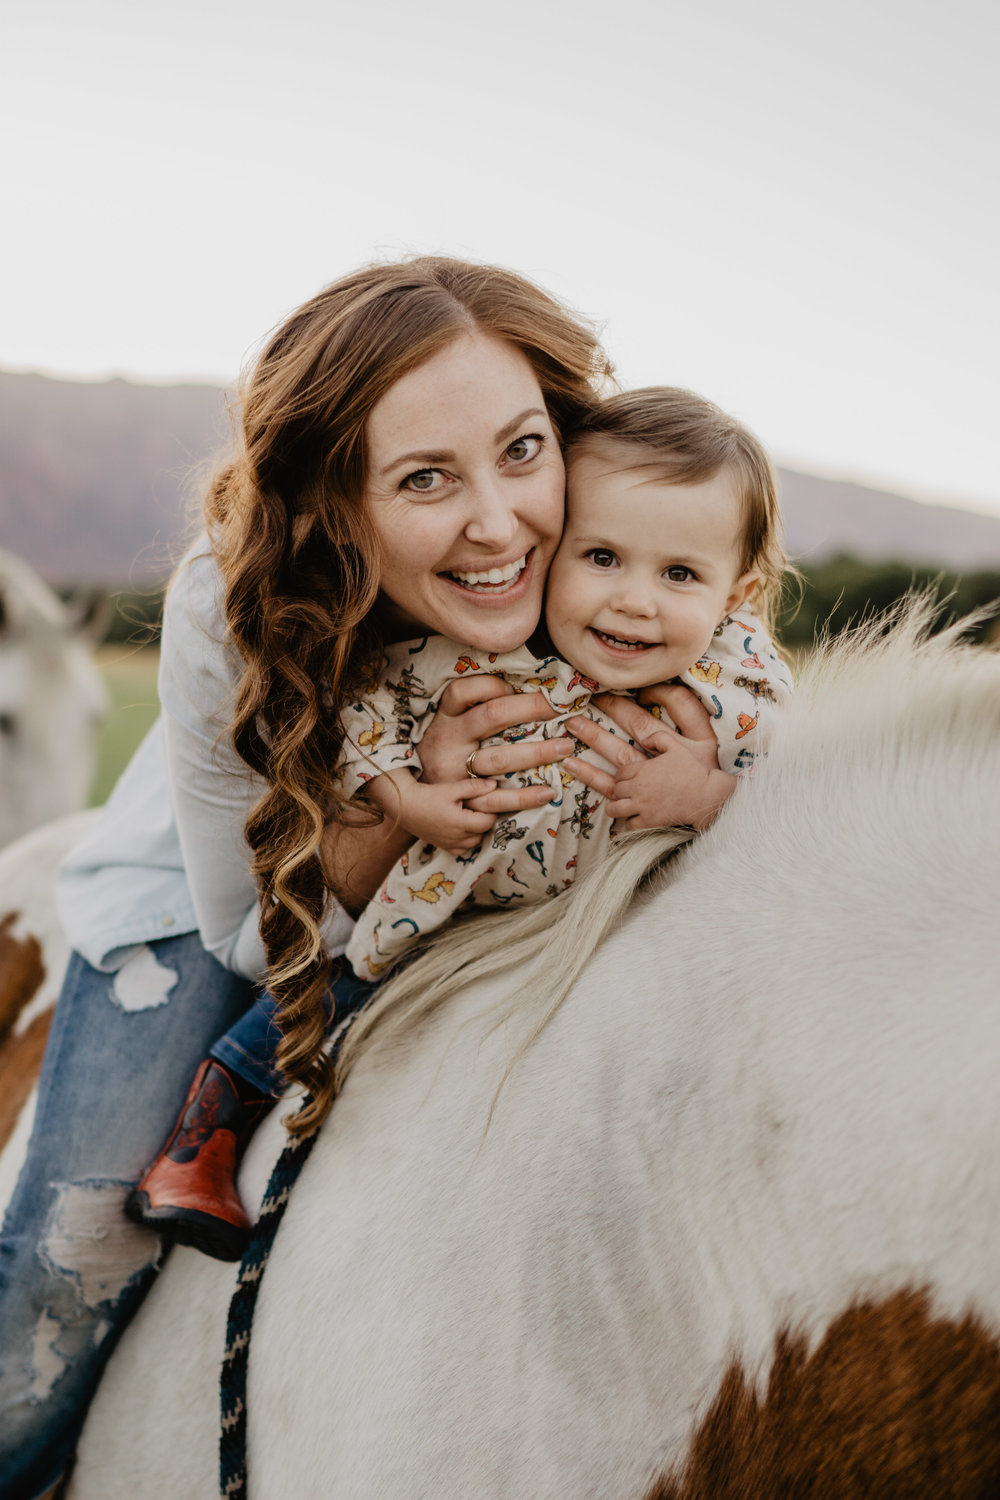 Jocilyn Bennett Photography | Portrait Photography | Capturing raw and genuine emotion | Utah photographer | Idaho photographer | Candid Photography | Photography that reflects who you are | Portraits are important | Elopement Photography | This is Me | Family photographer | Family horseback riding photograph |